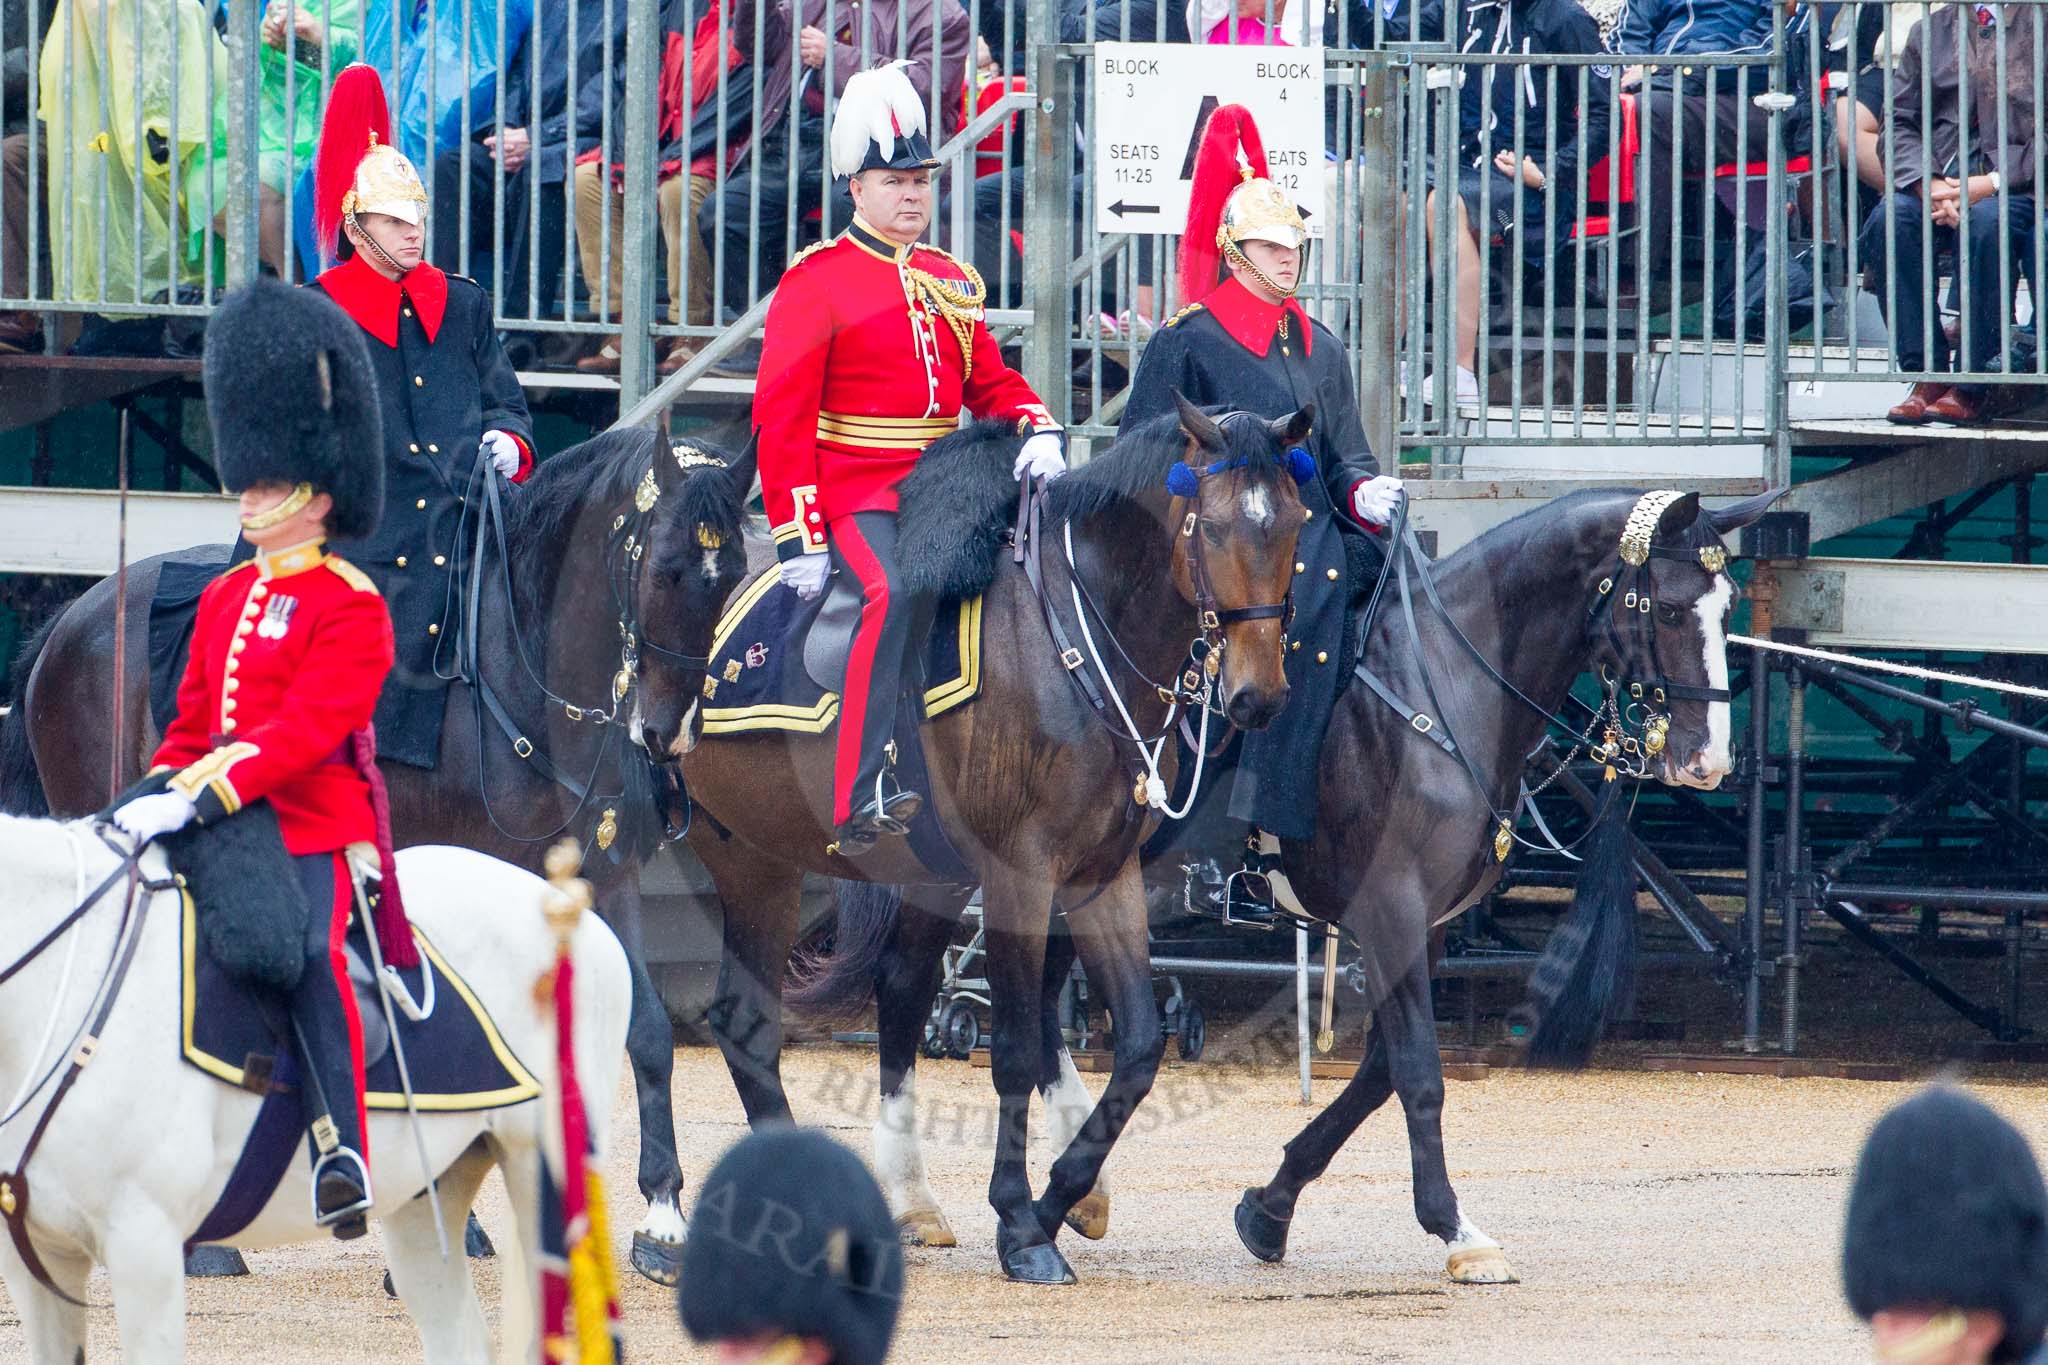 The Colonel's Review 2014.
Horse Guards Parade, Westminster,
London,

United Kingdom,
on 07 June 2014 at 10:58, image #255